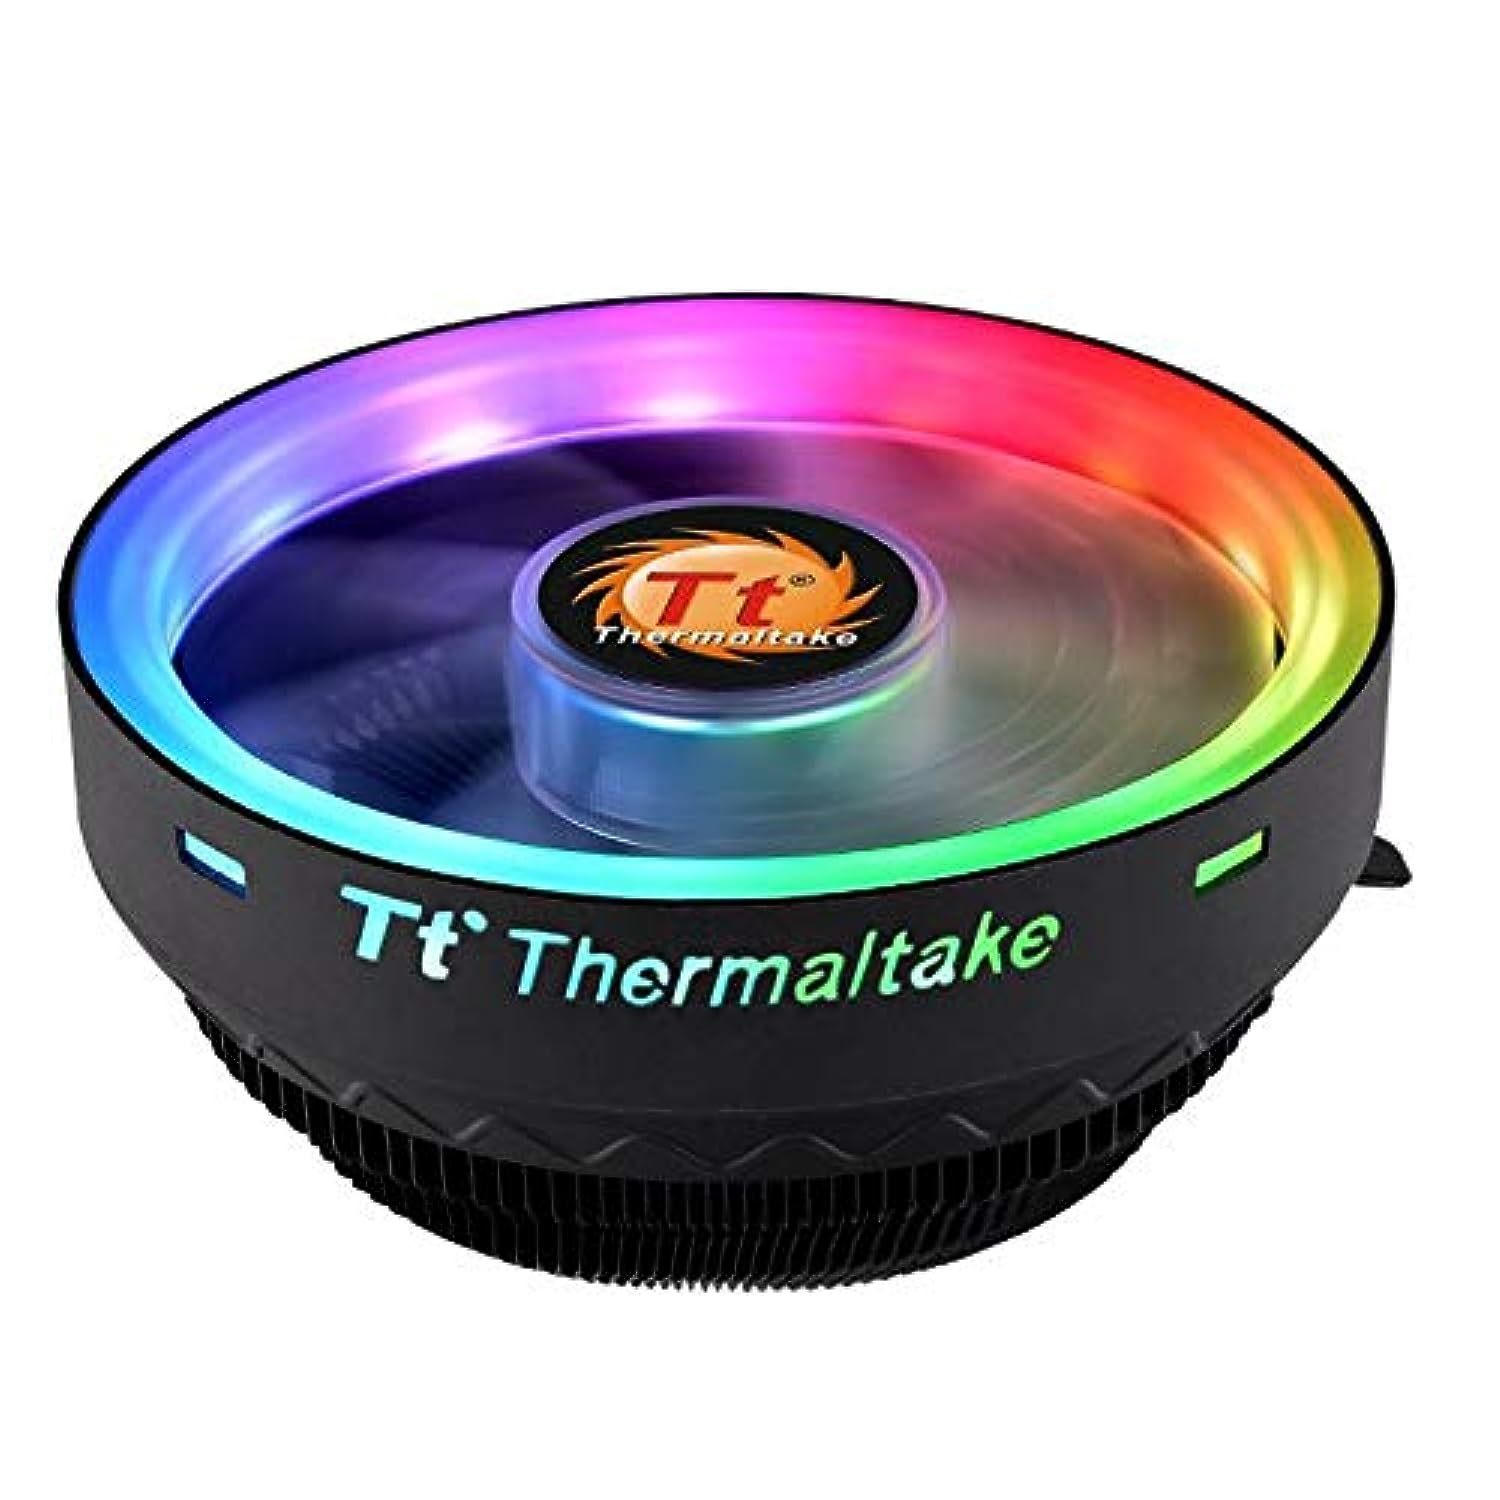 Thermaltake UX 100 Air Cooler ARGB | Quiet 120 mm PWM Fan | for Intel and AMD So - $37.99